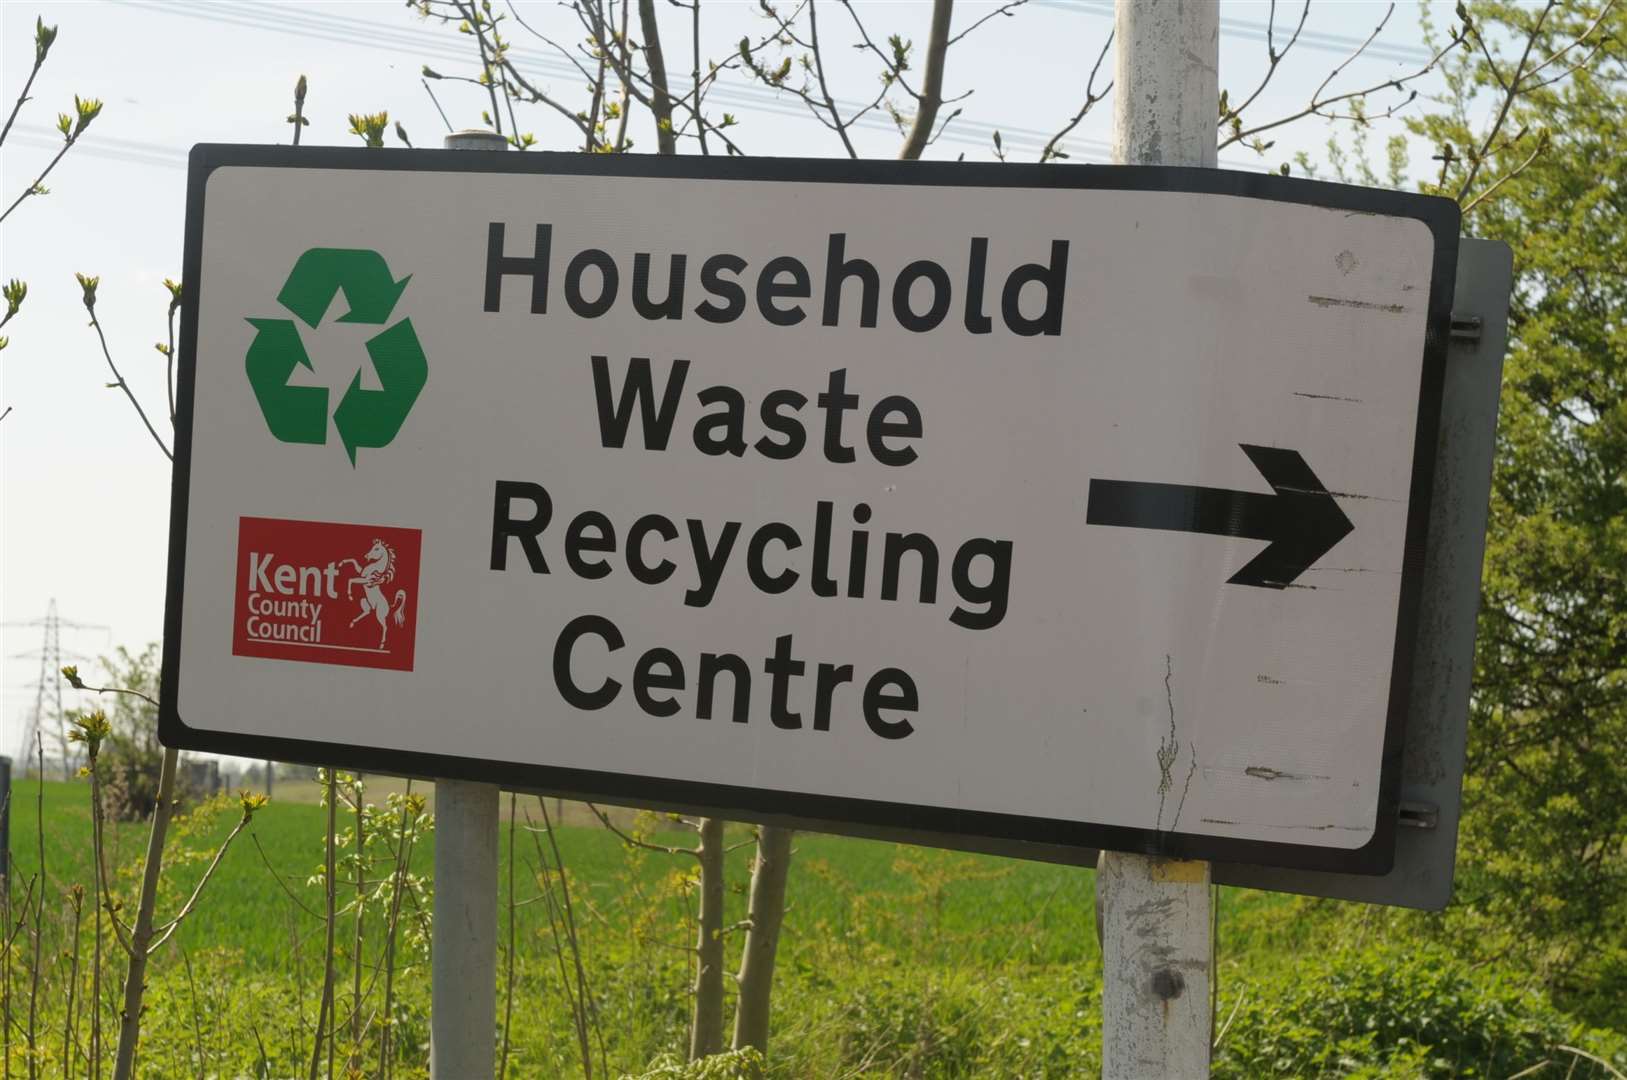 Recycling centres have been closed by Kent County Council